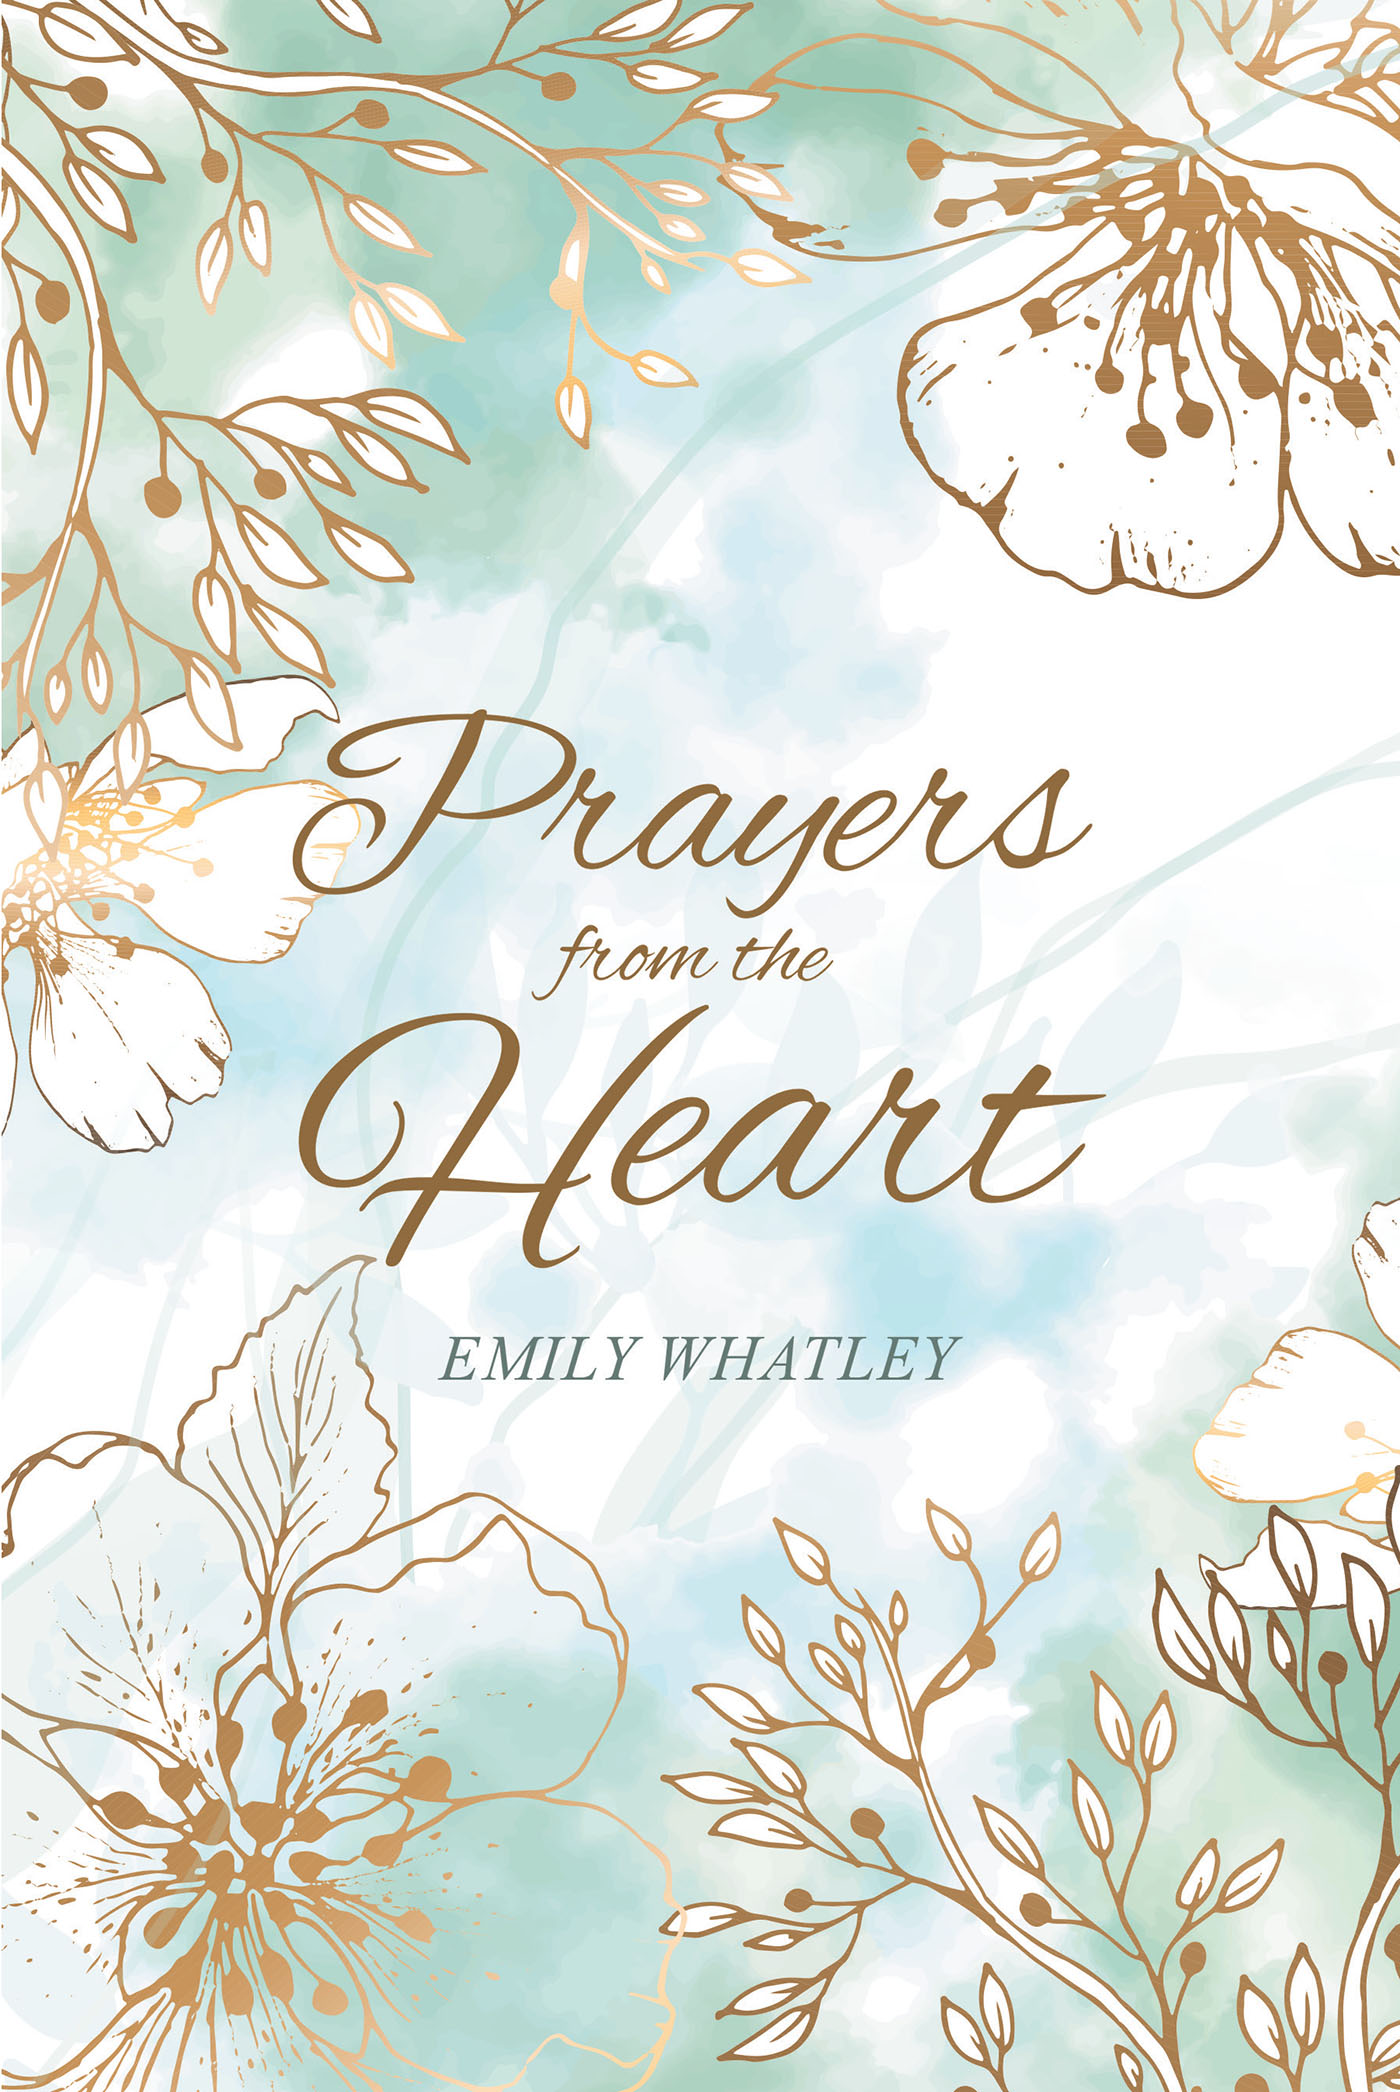 Author Emily Whatley’s New Book, "Prayers from the Heart," is an Interactive Book of Prayers That Invites Readers to Record Their Thoughts and Blessings with Each Prayer